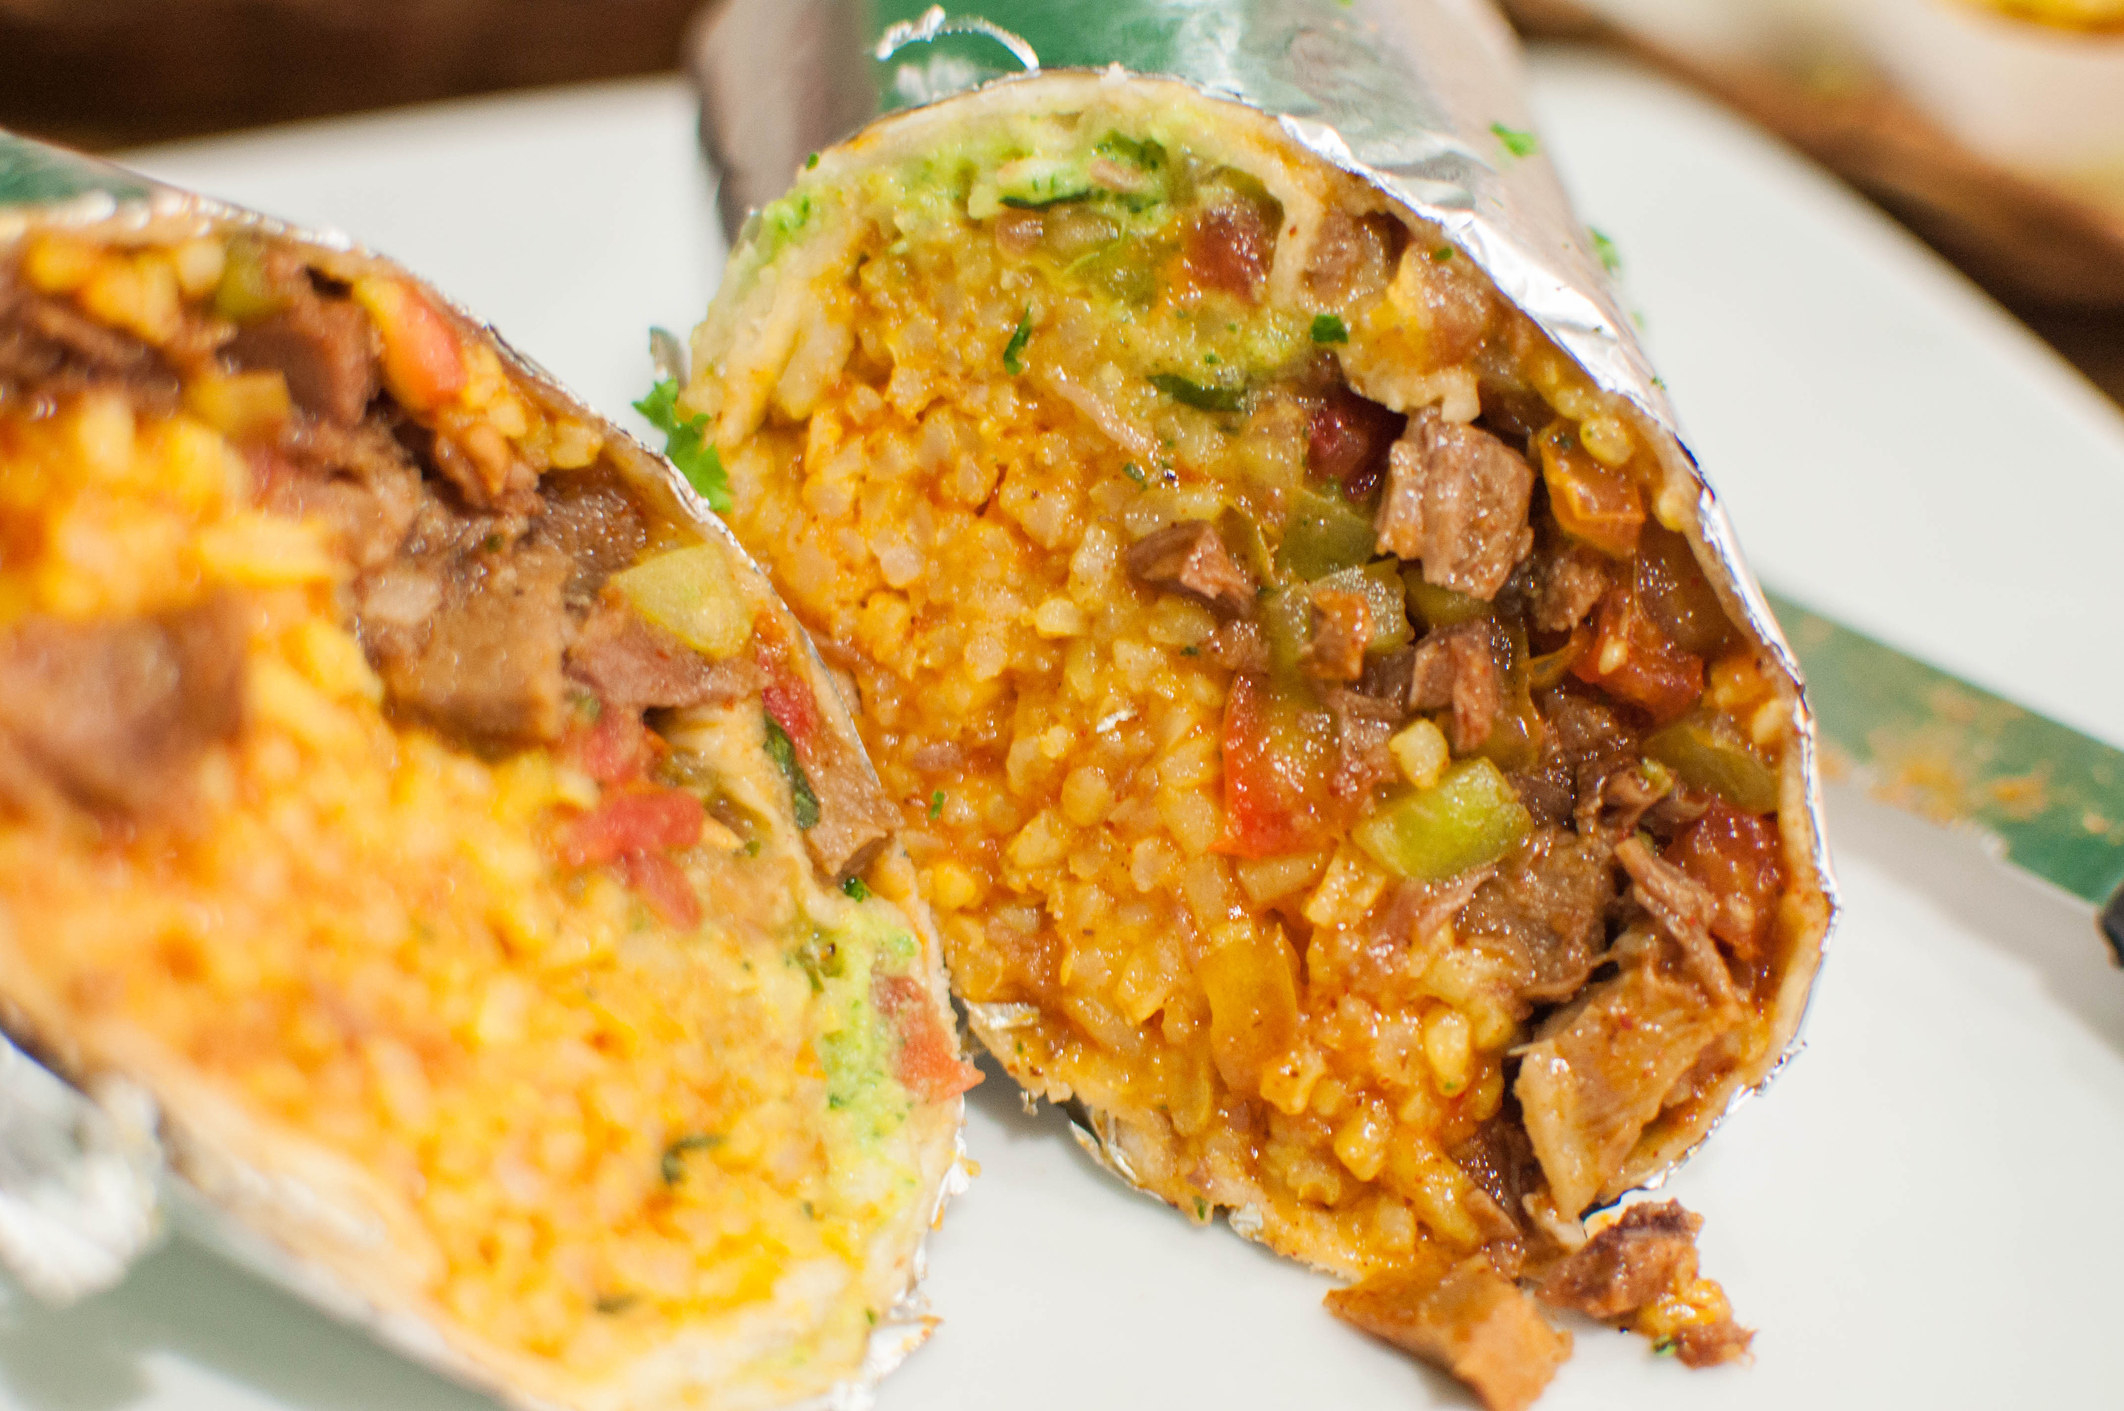 A burrito with rice and meat.